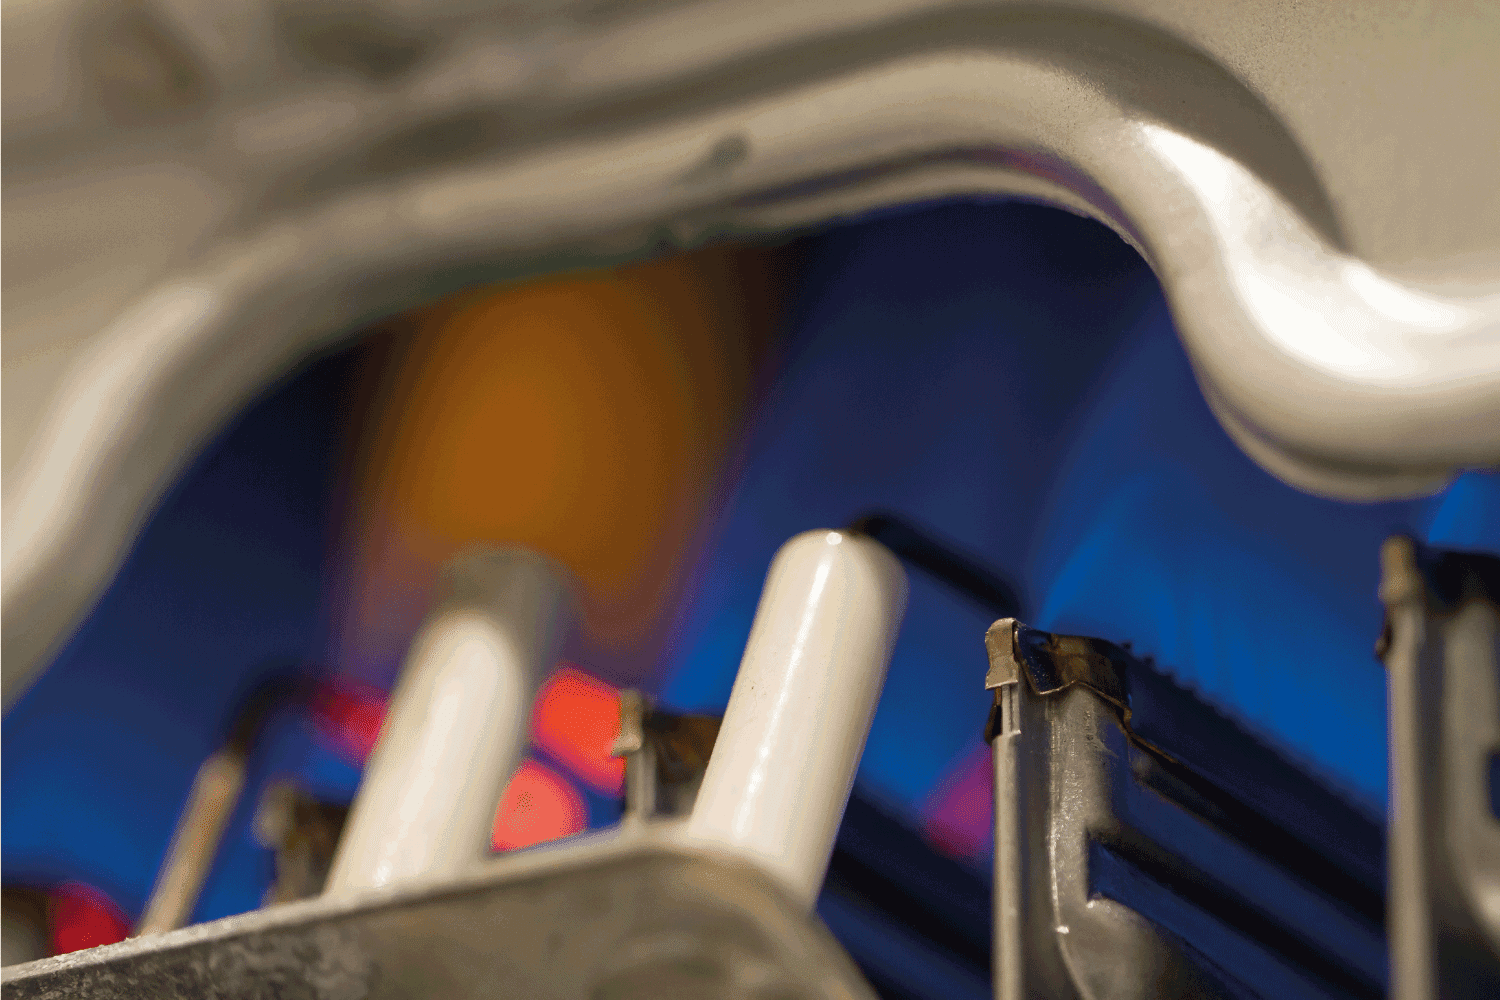 Close-up detail of a domestic gas water eater boiler, blue flames are visible inside